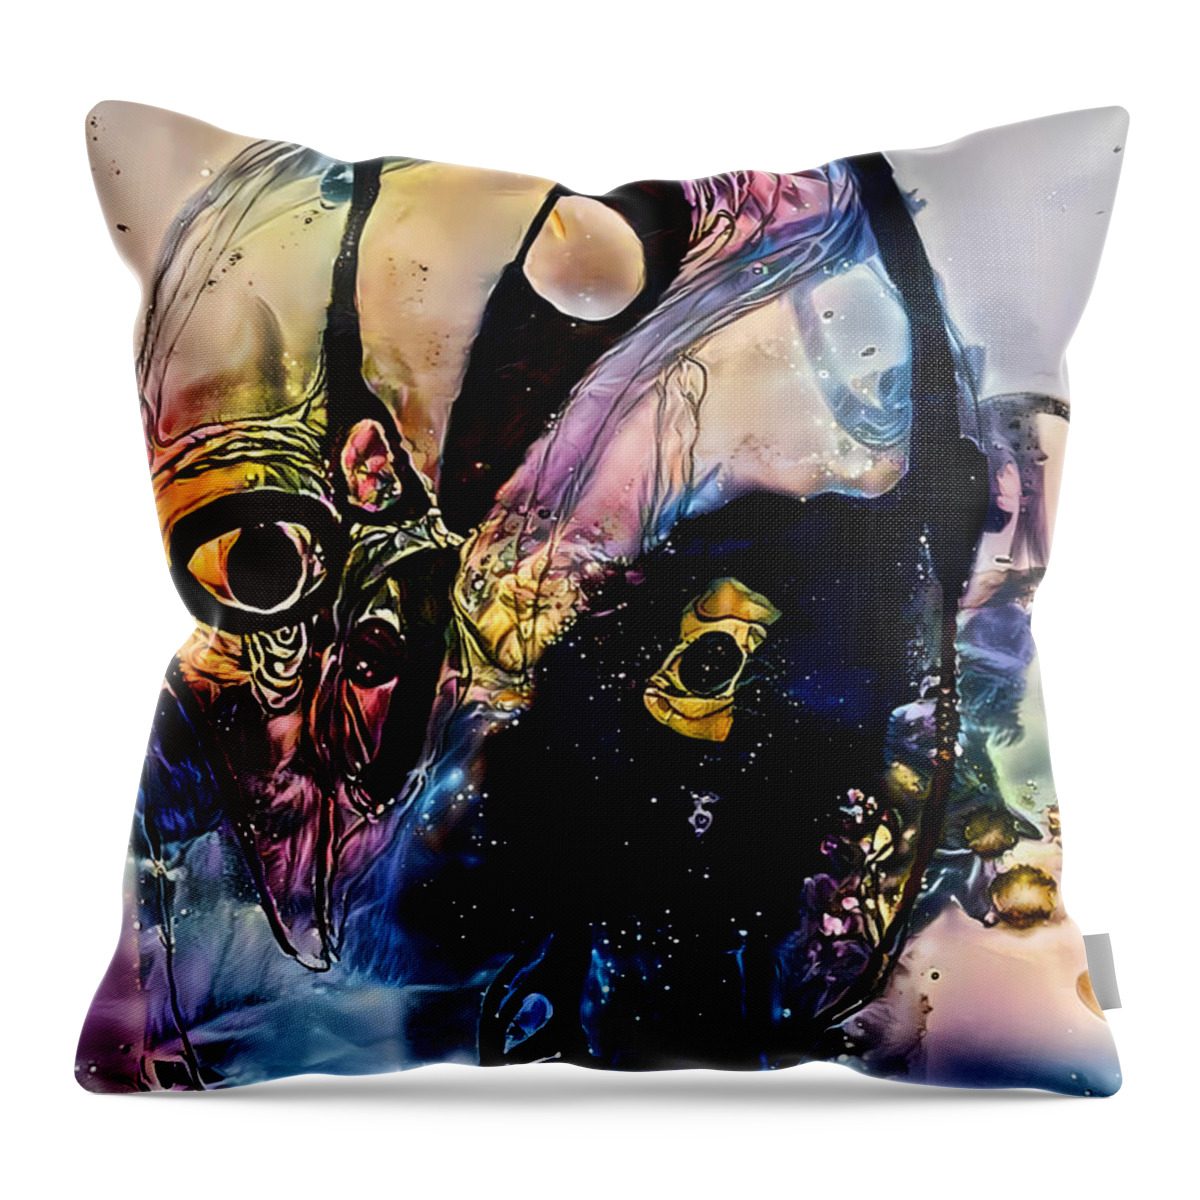 Contemporary Art Throw Pillow featuring the digital art 116 by Jeremiah Ray